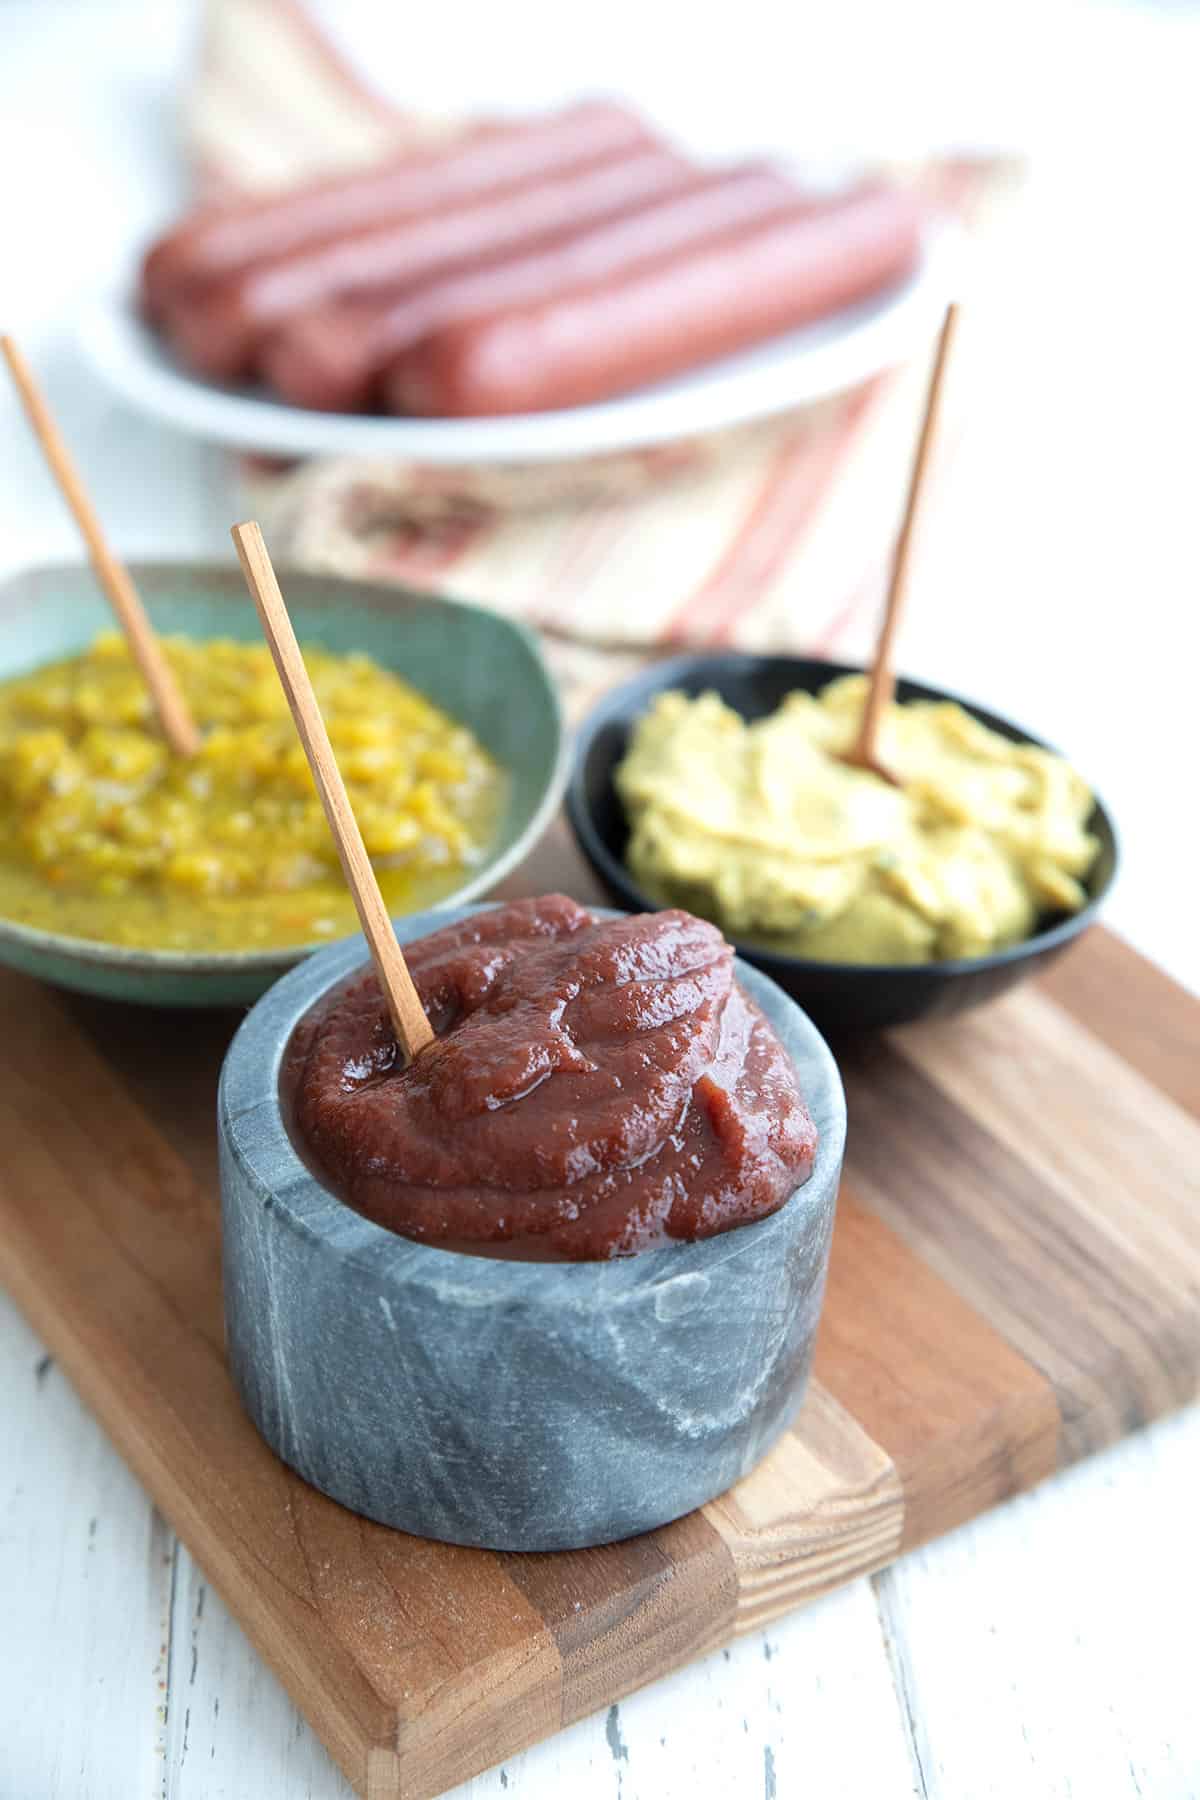 Sugar free ketchup and other condiments in bowls on a wooden cutting board.